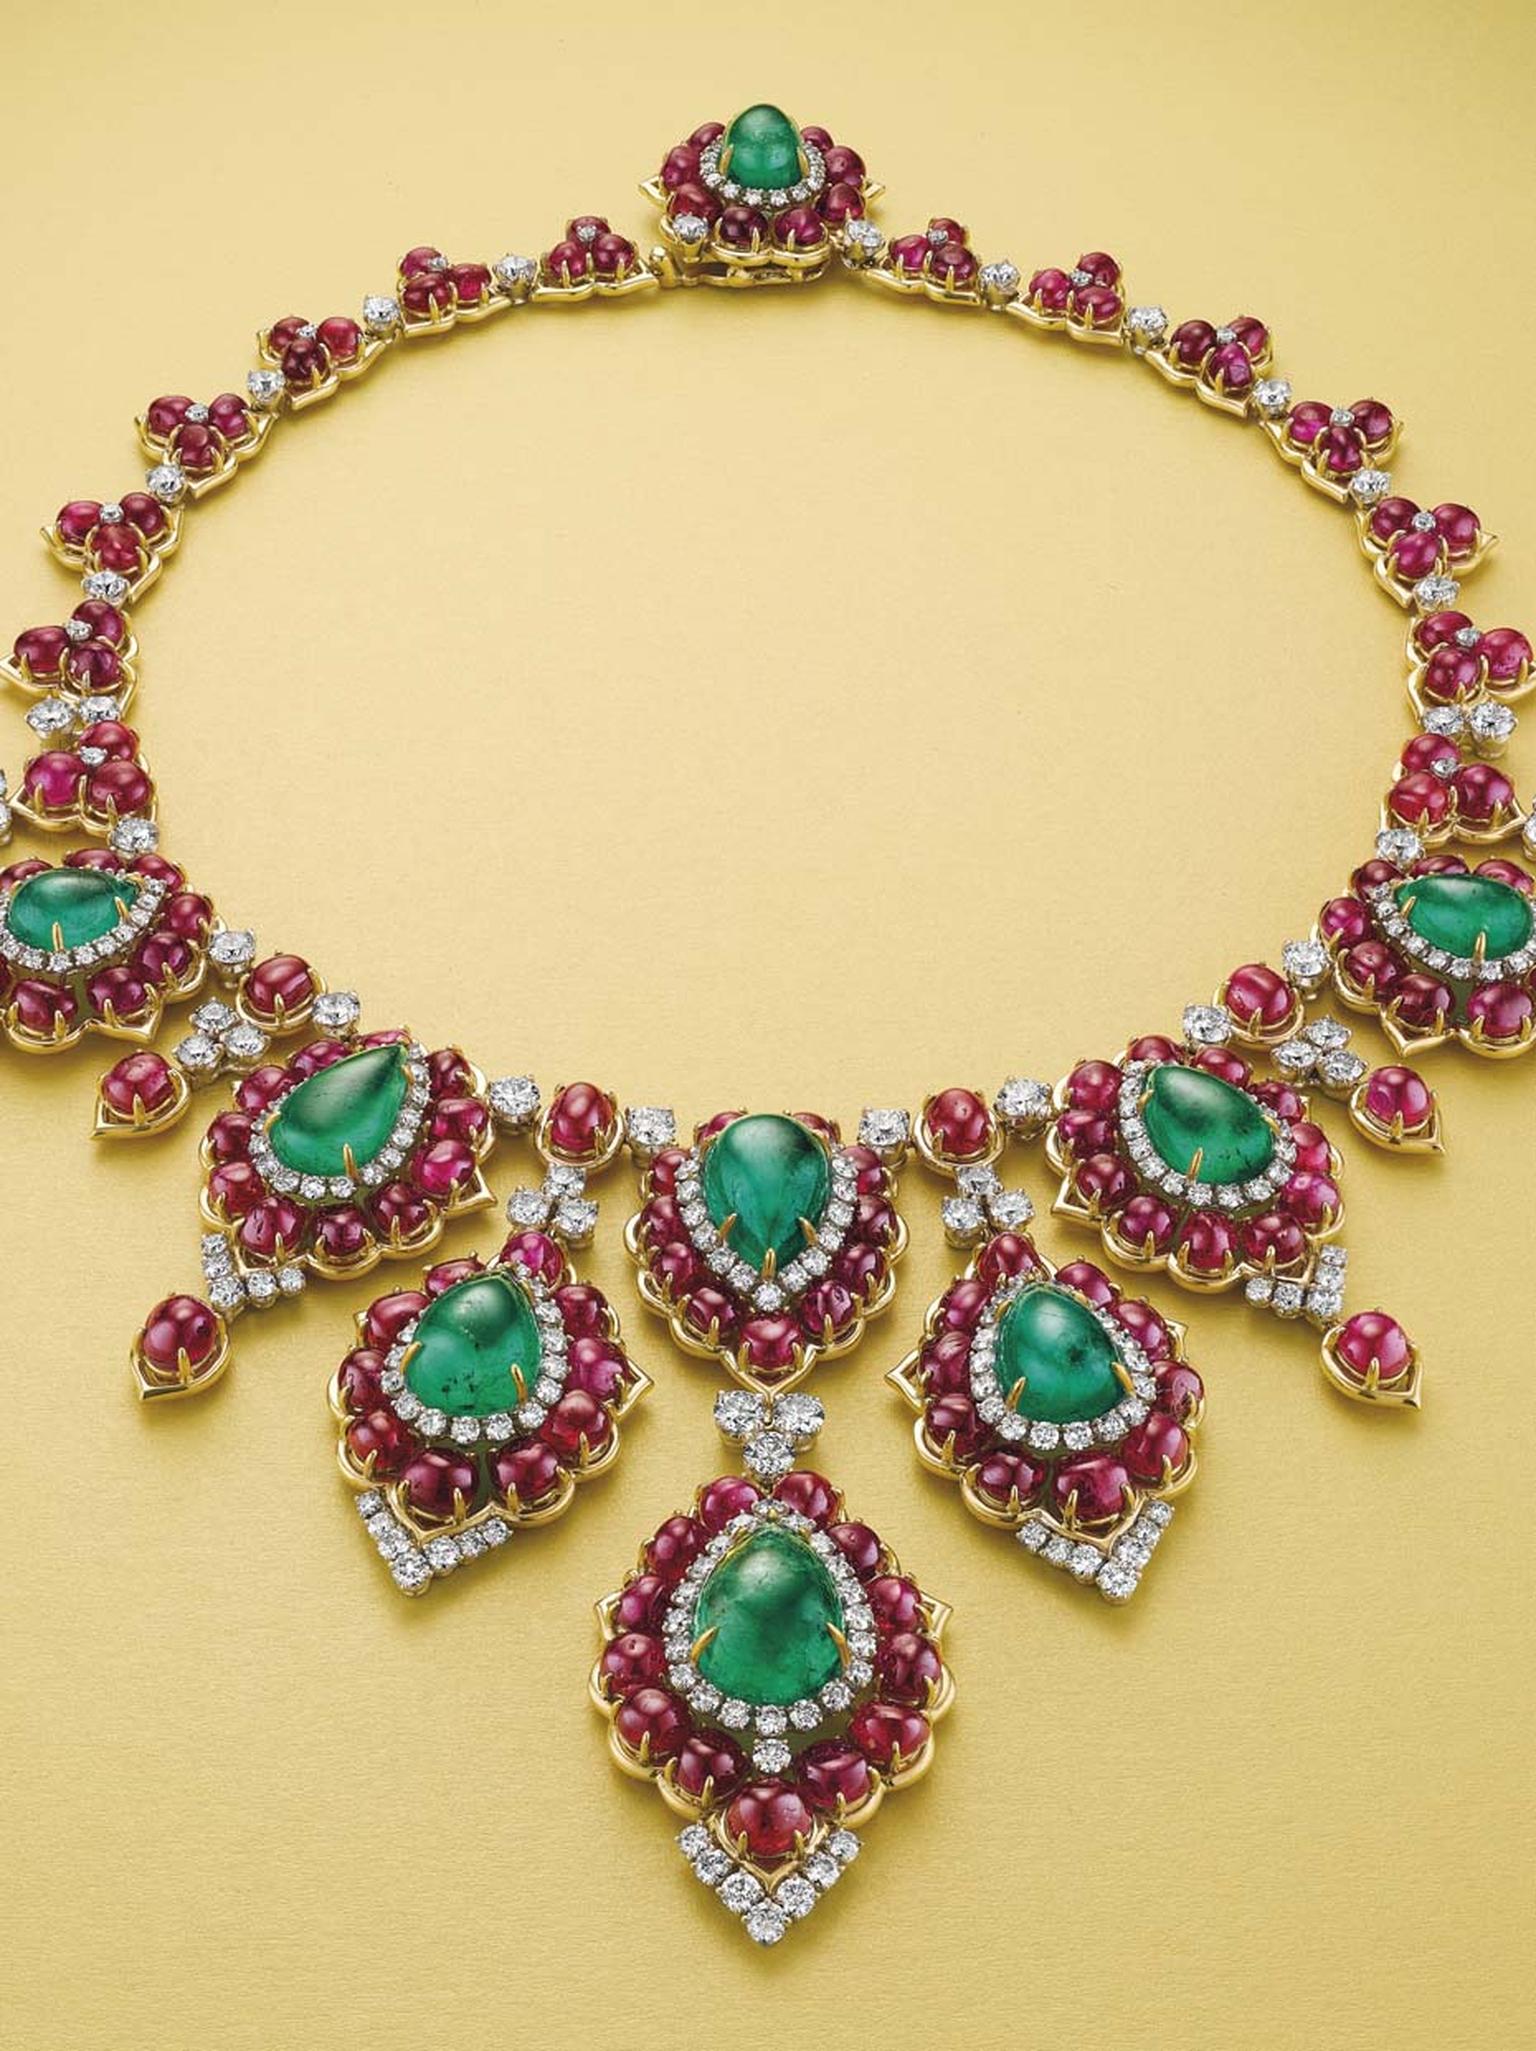 One of the highlights of Christie's Magnificent Jewels auction in New York is sure to be this superb emerald, ruby and diamond necklace by Bulgari, with an estimated value of $300-400,000.